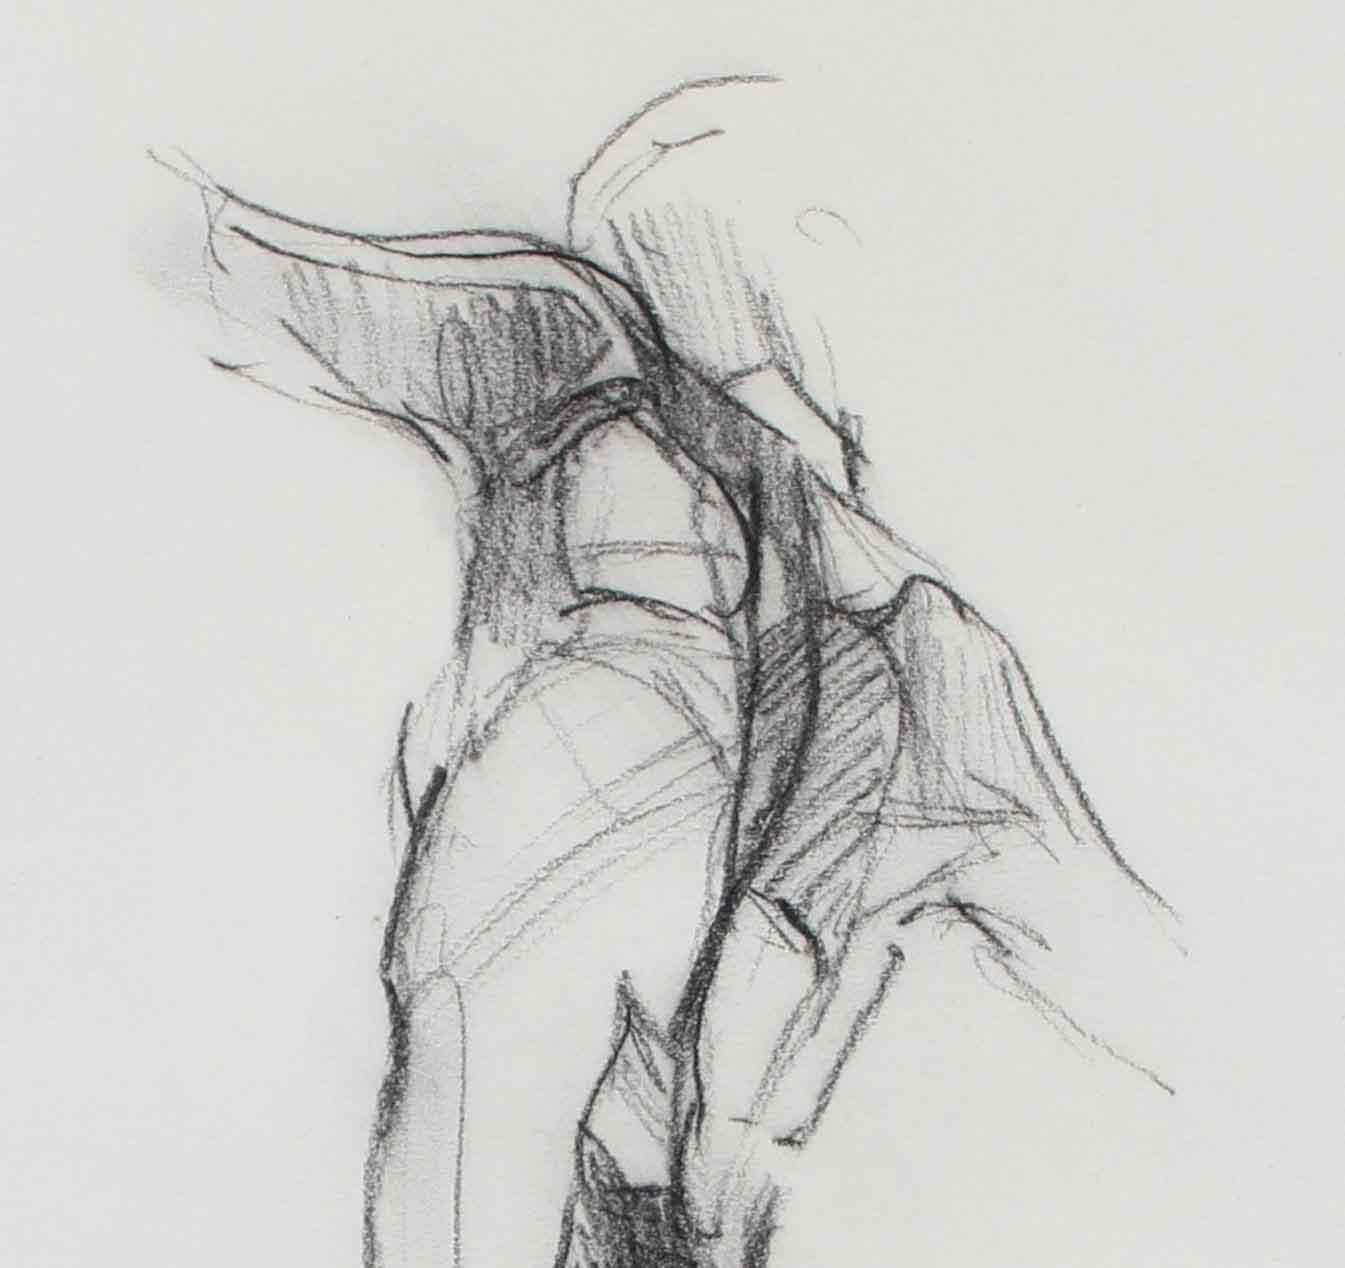 Monochromatic Figure Drawing, Graphite on Paper, Late 20th Century - Art by Anna Poole